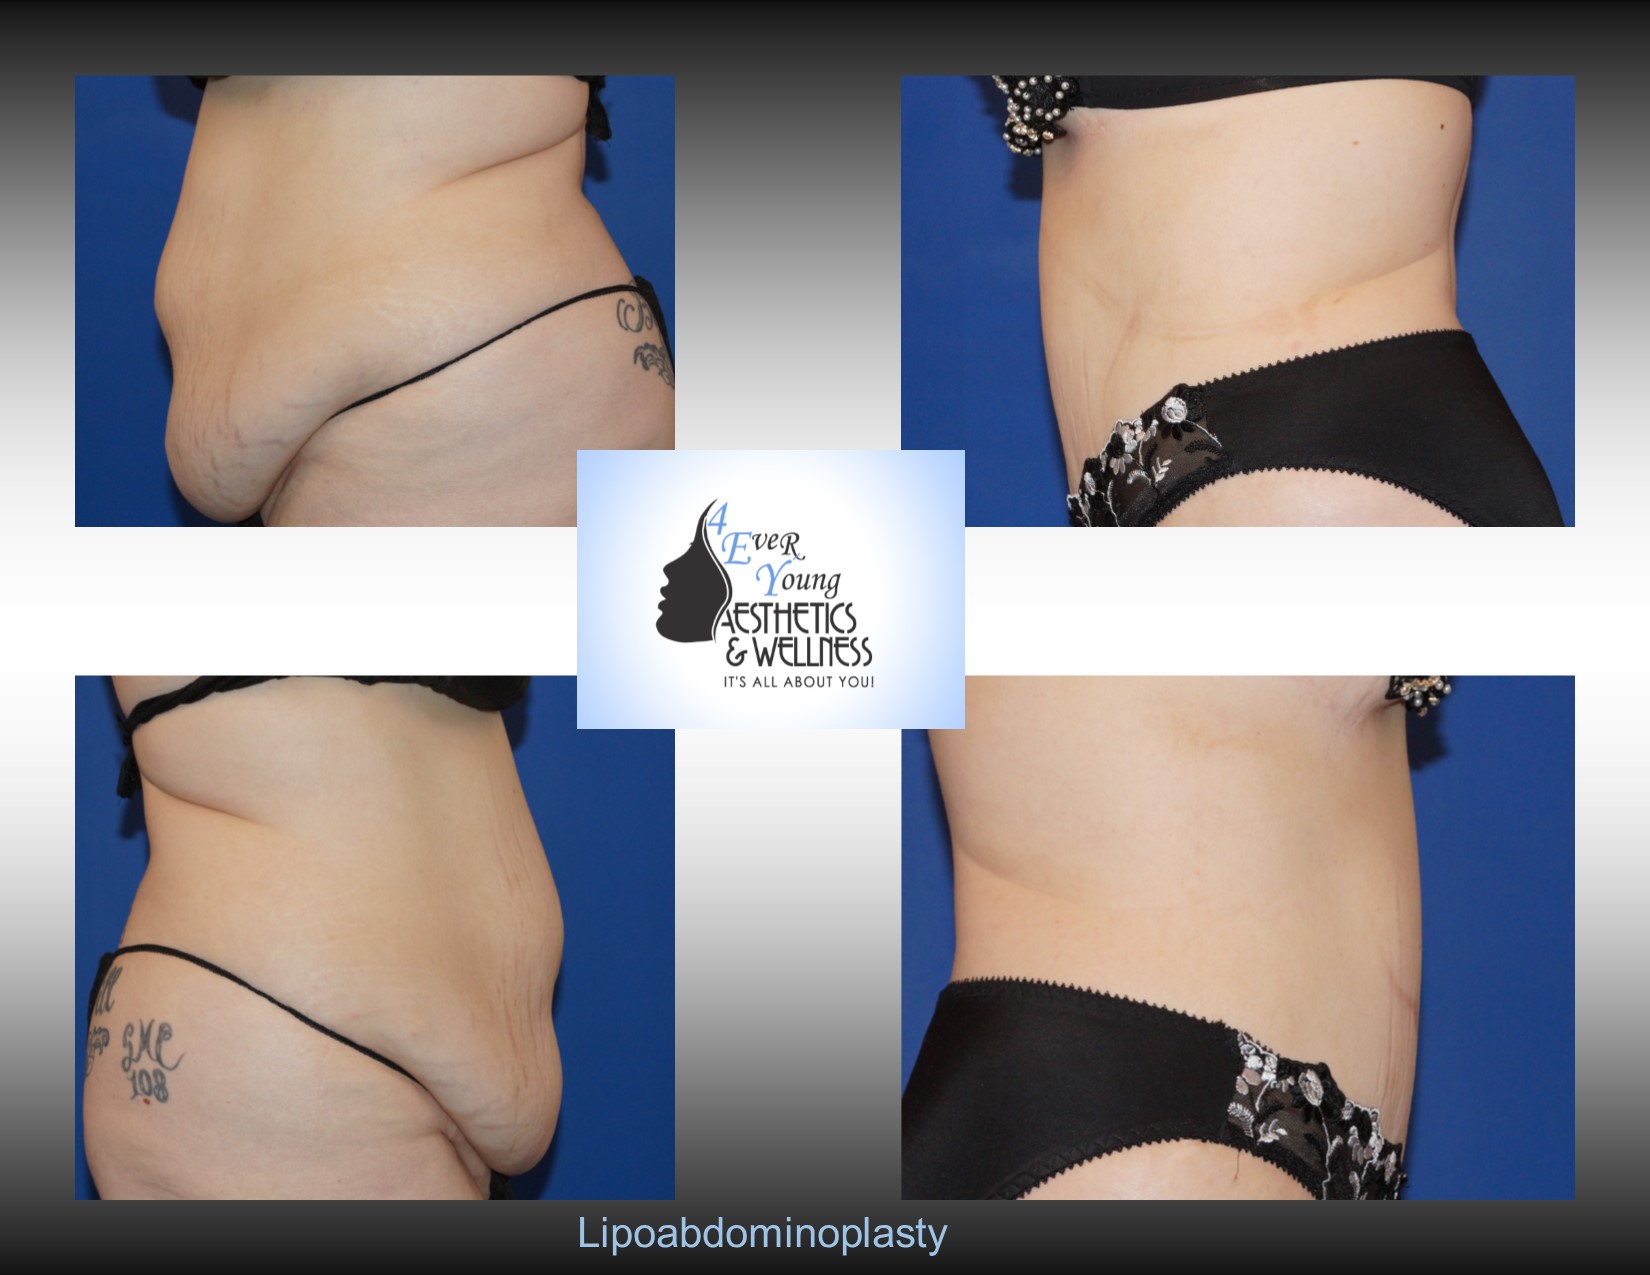 Atlanta Tummy Tuck,Tummy Tuck, also known as abdominoplasty, lipoabdominoplasty, liposuction tummy tuck, is a procedure to that corrects a rectus diasthasis and removes excess or poor quality skin from the abdomen. We combine our tummy tuck with liposuction in order to contour the body resulting in a flat stomach with scars that are placed low in the bikini line. Our liposuction is accomplished by either traditional tumescent liposuction, laser liposuction (Smartlipo), vaser liposuction with the use of a power assisted liposuction handle to remove fat more thoroughly and rapidly. We use abdominal liposuction, flank liposuction, back liposuction, arm liposuction, thigh liposuction and ankle liposuction to remove unsightly fat from problem areas with our tumescent liposuction procedures with or without sedation. If you desire we use autologous fat transfer (fat grafting) to use the fat obtained as the most natural dermal filler unlike synthetic fillers (Restylane, Juvederm, Sculptra, Radiesse, Belotero, Perlane) to improve fine lines and wrinkles of the face, hand rejuvenation with fat, fat transfer to breast, Brazilian Butt Lift (Butt Augmentation), liposculpture, lip augmentation with fat.  Fat transfer to the breast can be a great alternative to breast augmentation, saline implants, silicone implants, breast augmentation with mastopexy or just to improve volume in the upper pole of the breast. Our autologous fat transfer is second to none and we utilize Platelet-Rich Plasma (PRP) which helps stabilize the fat transfer faster by promoting blood vessels to grow into the fat grafting. Most people think that a Brazilian butt lift (BBL) is a plastic surgery procedure but instead it is a cosmetic surgery procedure strictly performed for enhancement of the buttock area to transform your butt into the big Brazilian butt and replicate the popular Brazilian ass that Brazilian butt women have been getting Brazilian butt lifts to have for years.  As part of our mommy makeover packages you can combine a Brazilian ass with a tummy tuck and/or breast augmentation with a mastopexy, which is more commonly associated with a mommy makeover, brazilian butt lift atlanta, atlanta brazilian butt lift, liposuction plastic surgery, liposuction, laser liposuction. fat grafting, brazilian ass, brazilian butt women, fat transfer, botox, plastic surgery, cosmetic surgery, plastic surgeon, cosmetic surgeon 